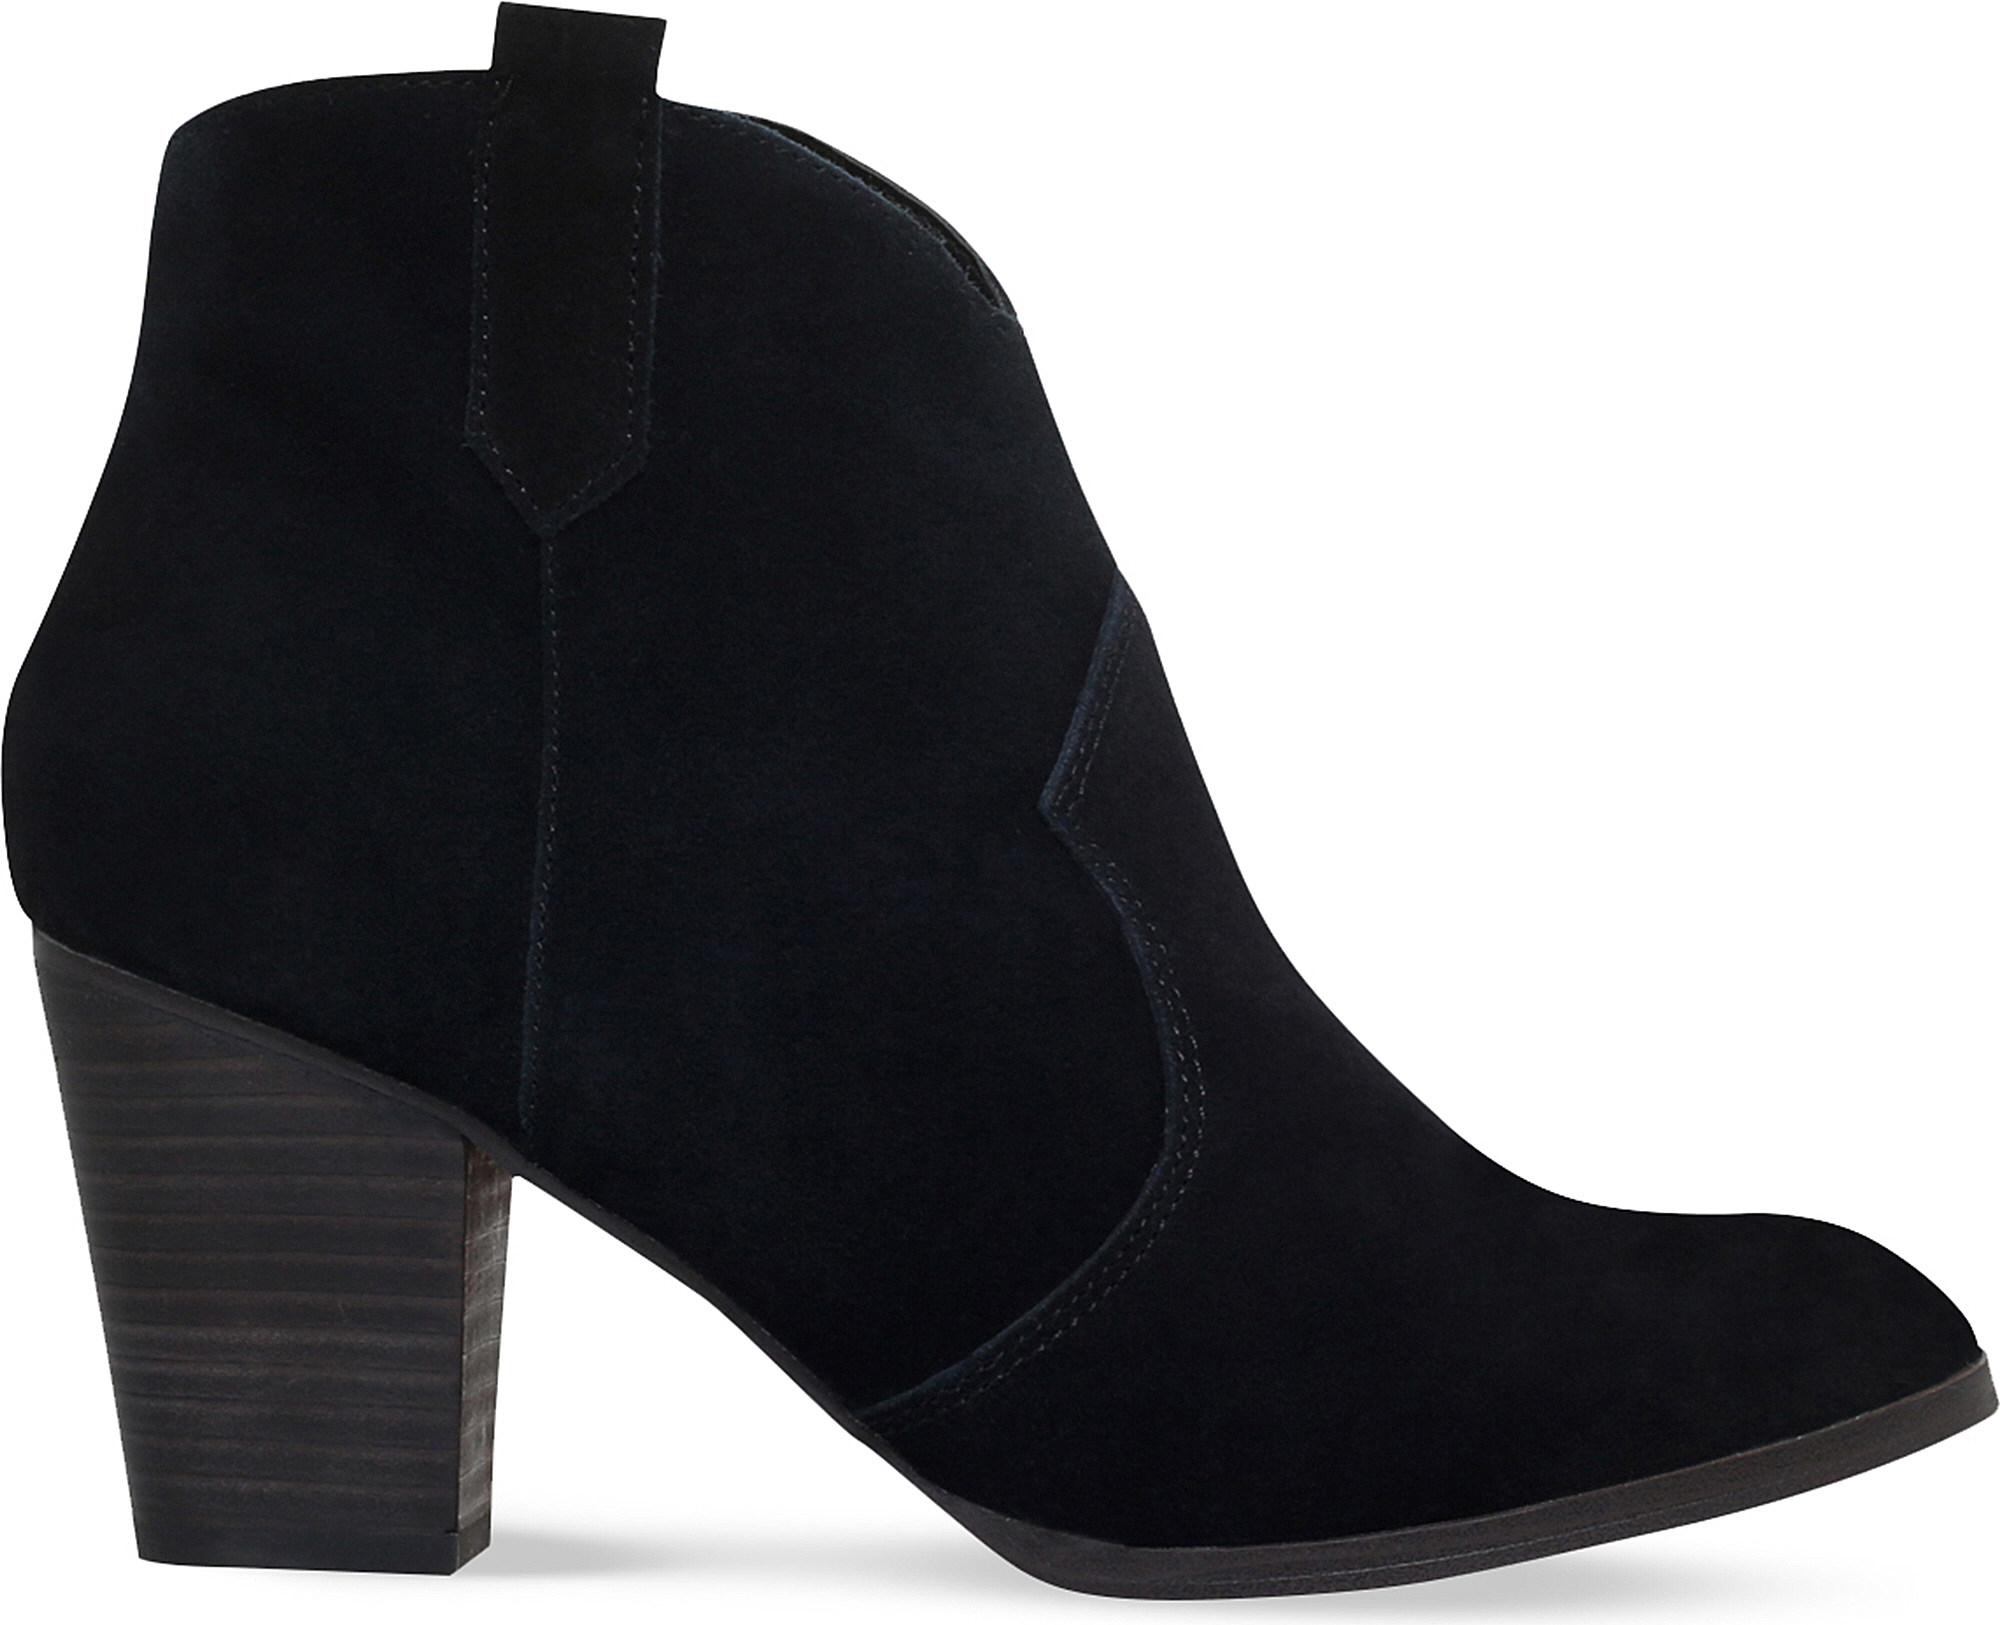 Miss Kg Sade Suede Ankle Boots in Black 